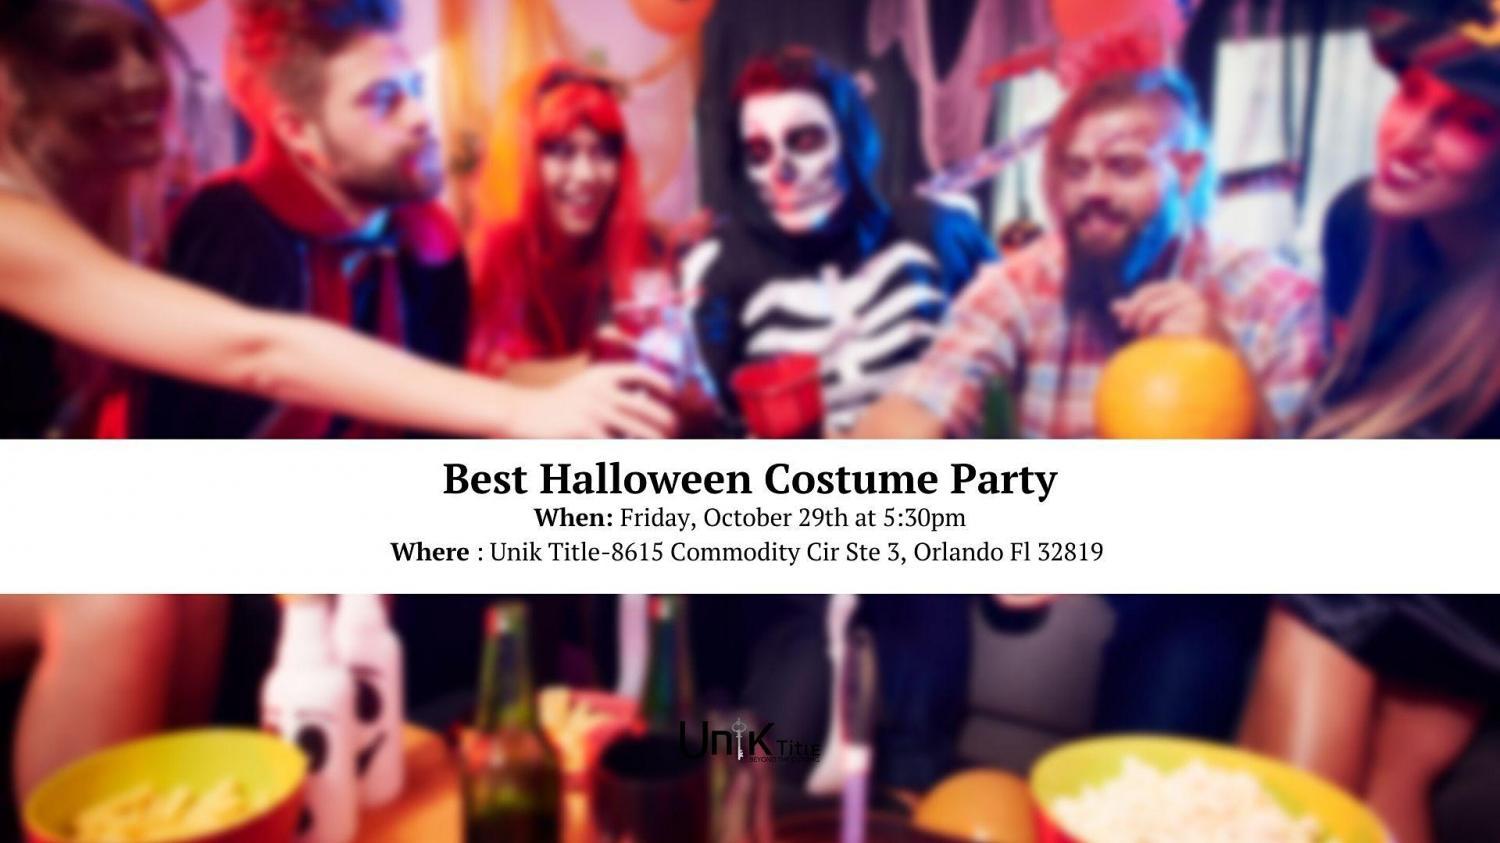 Best Halloween Costume Party (Real Estate)